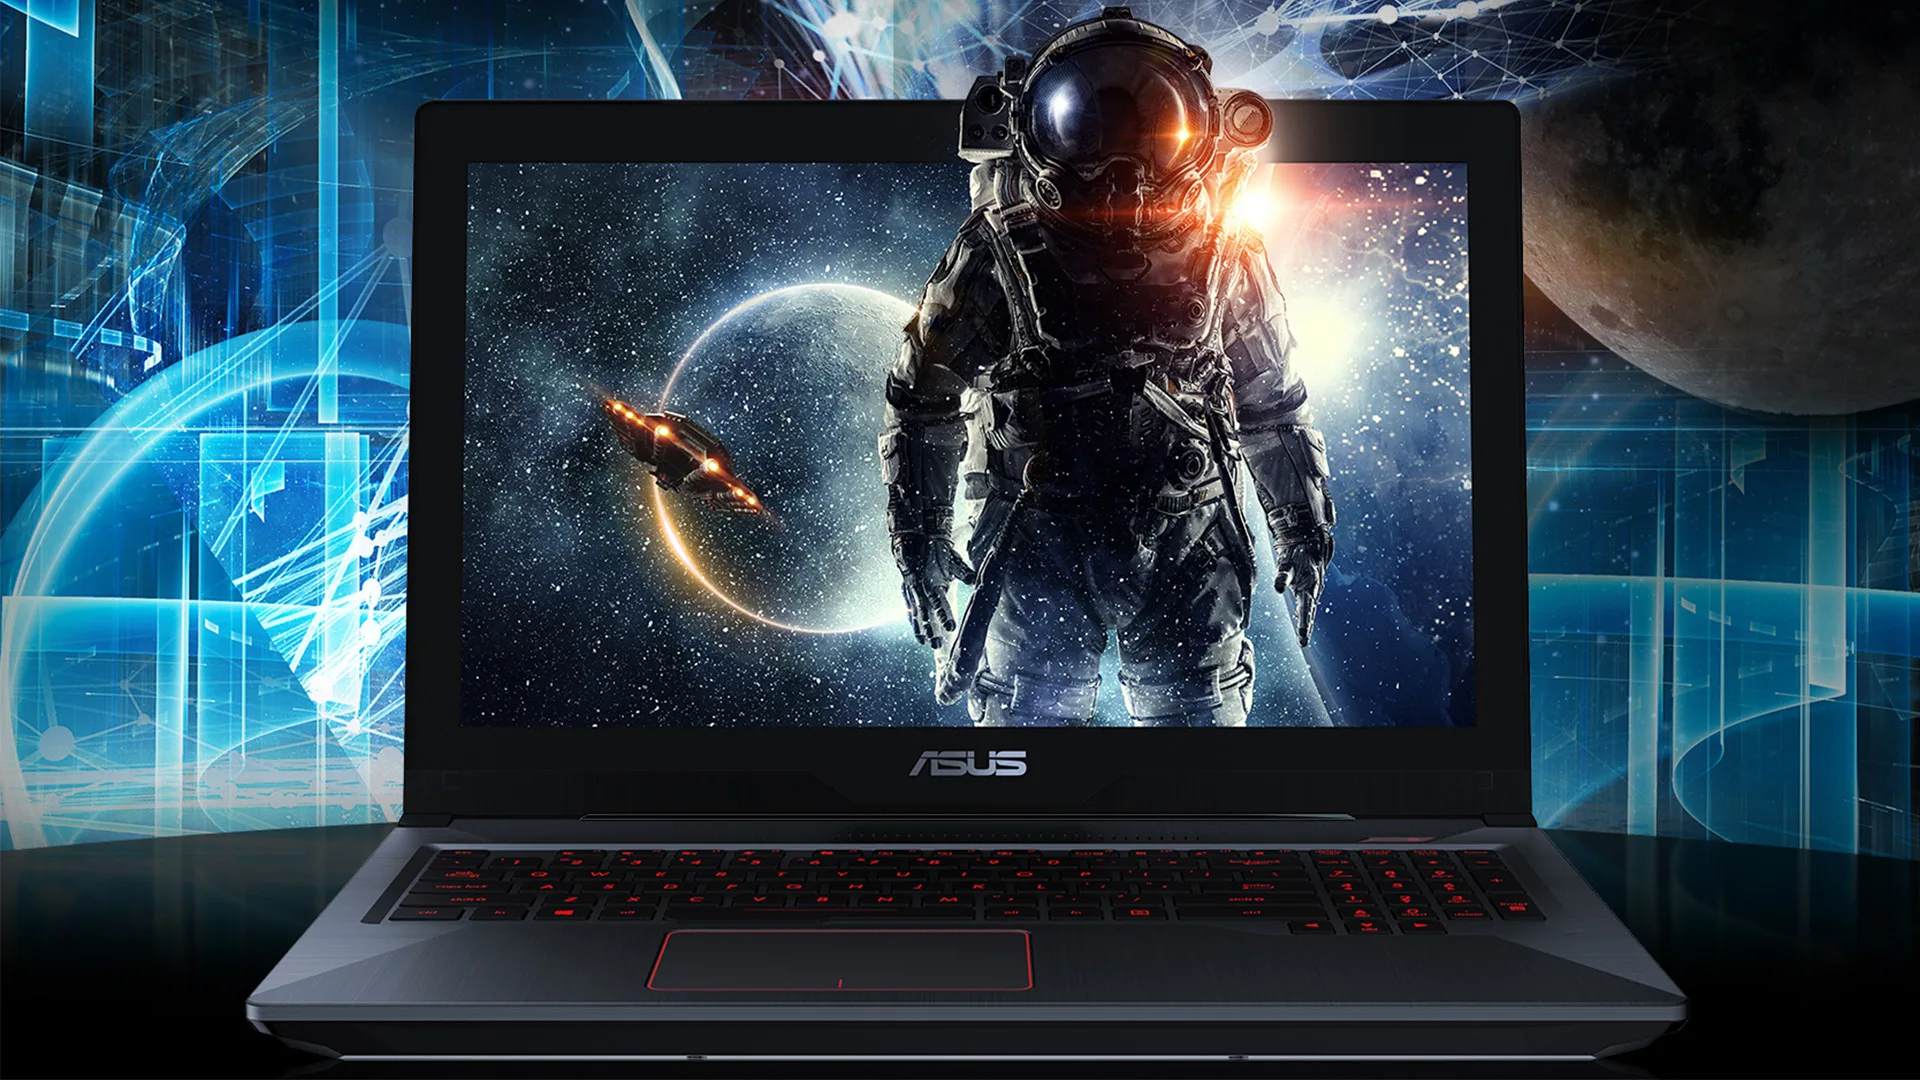 Review of the ASUS ROG FX503 Gaming Laptop